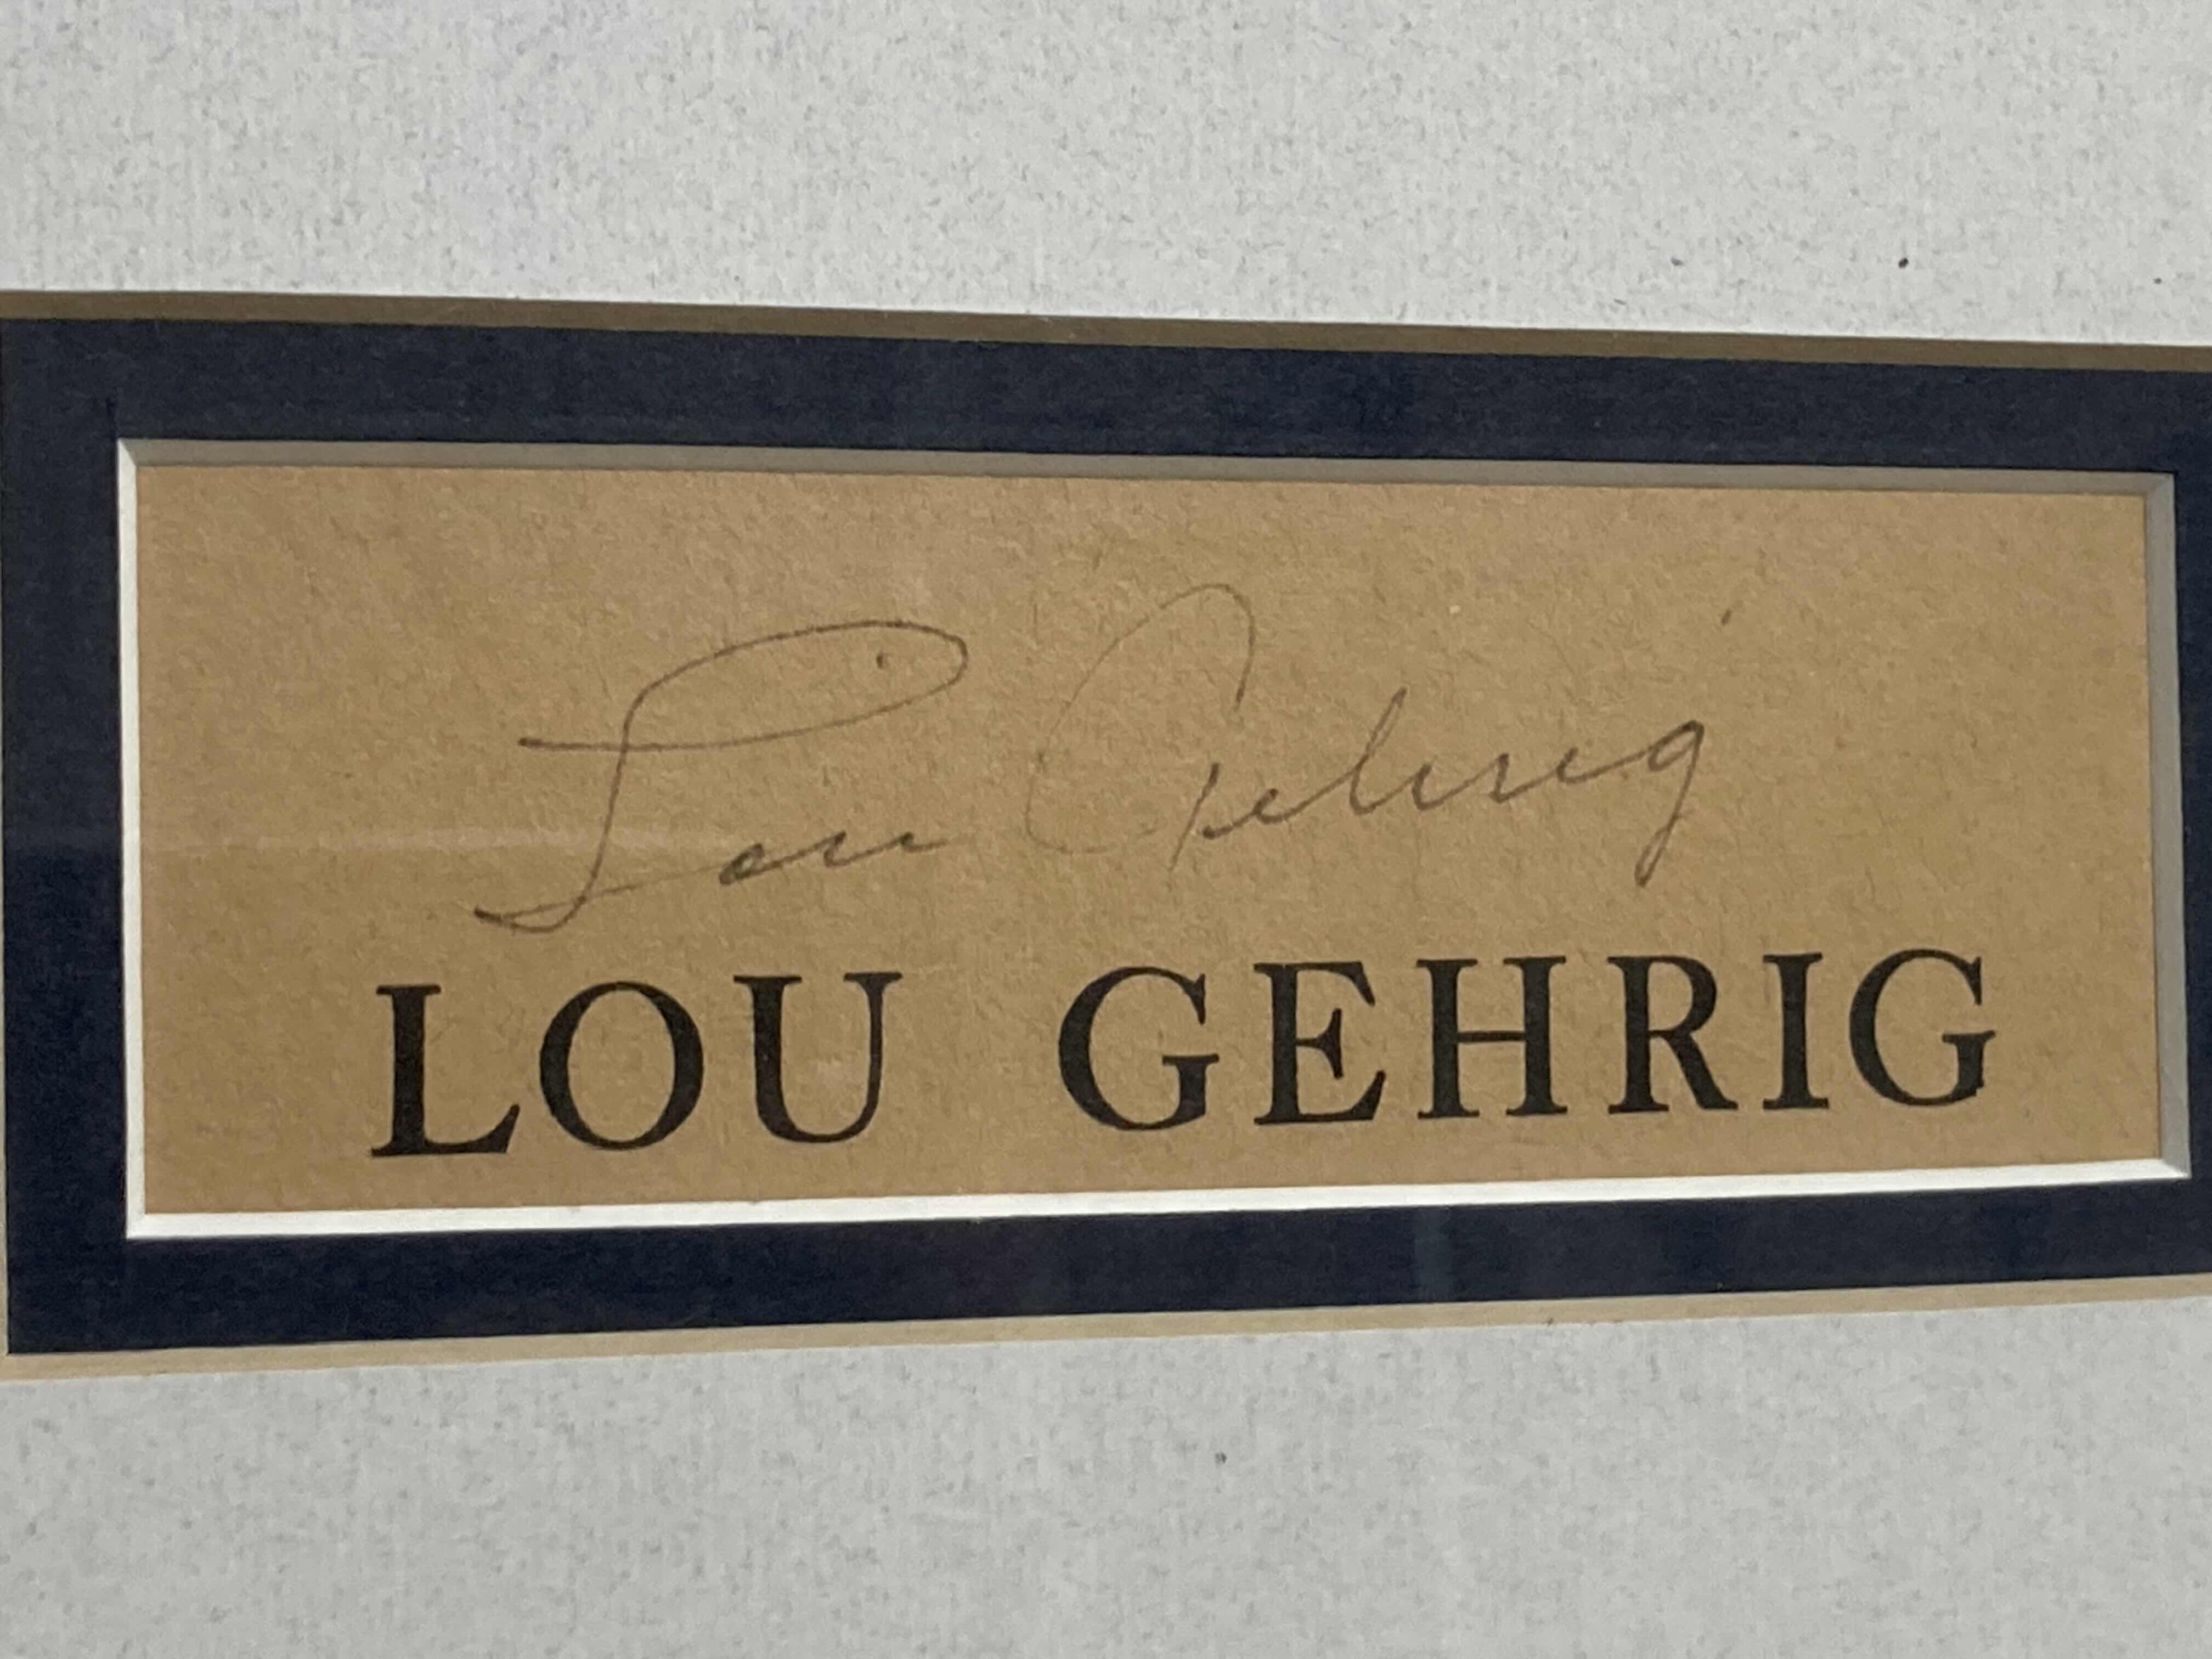 Photo 3 of LOU GEHRIG YANKEES FRAMED PHOTOGRAPH AUTOGRAPHED BY LOU GEHRIG NO COA 18.75” X 18”